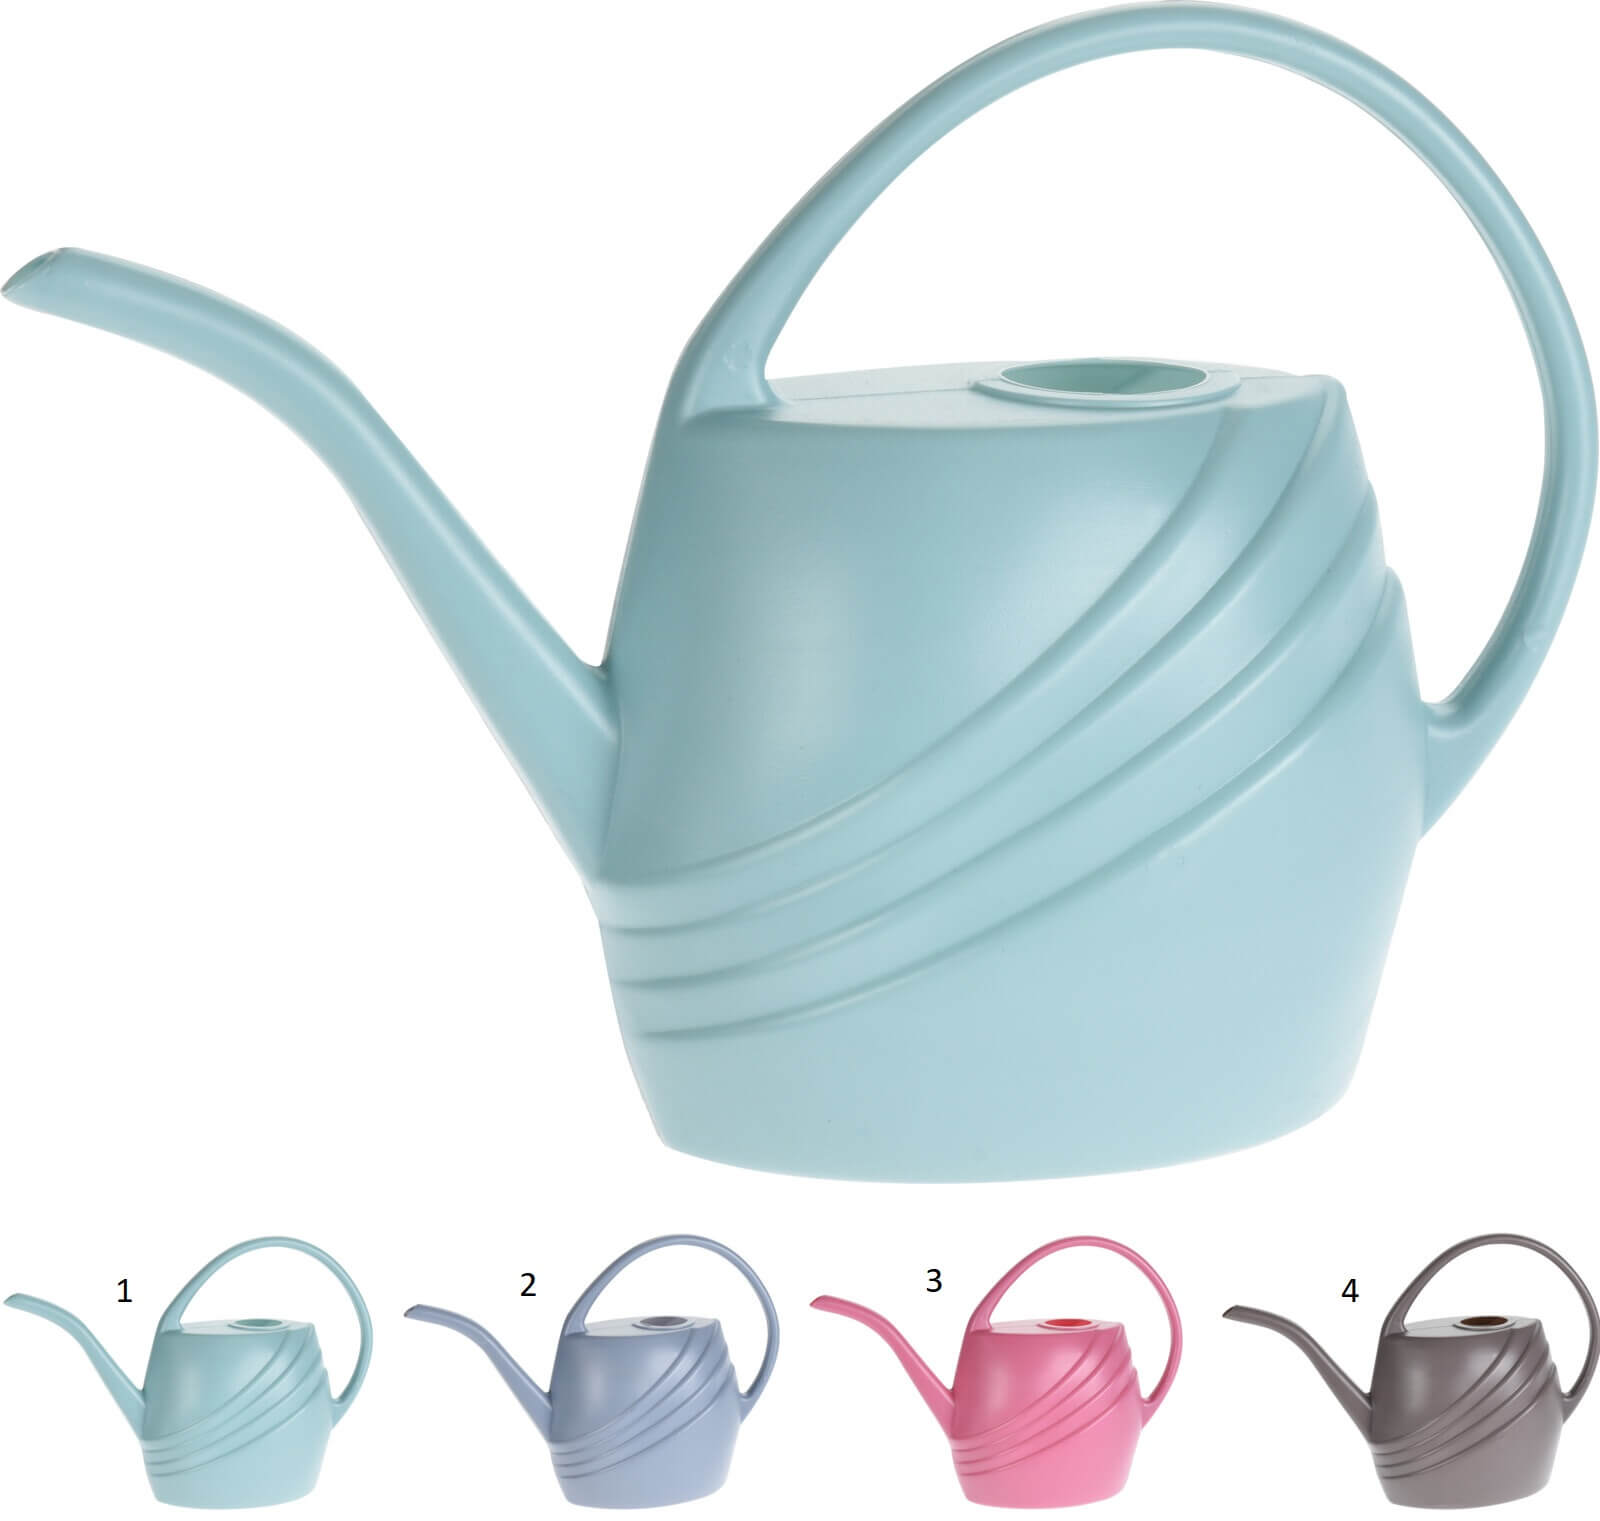 WATERING CAN 1500ML 3 ASSORTED COLORS